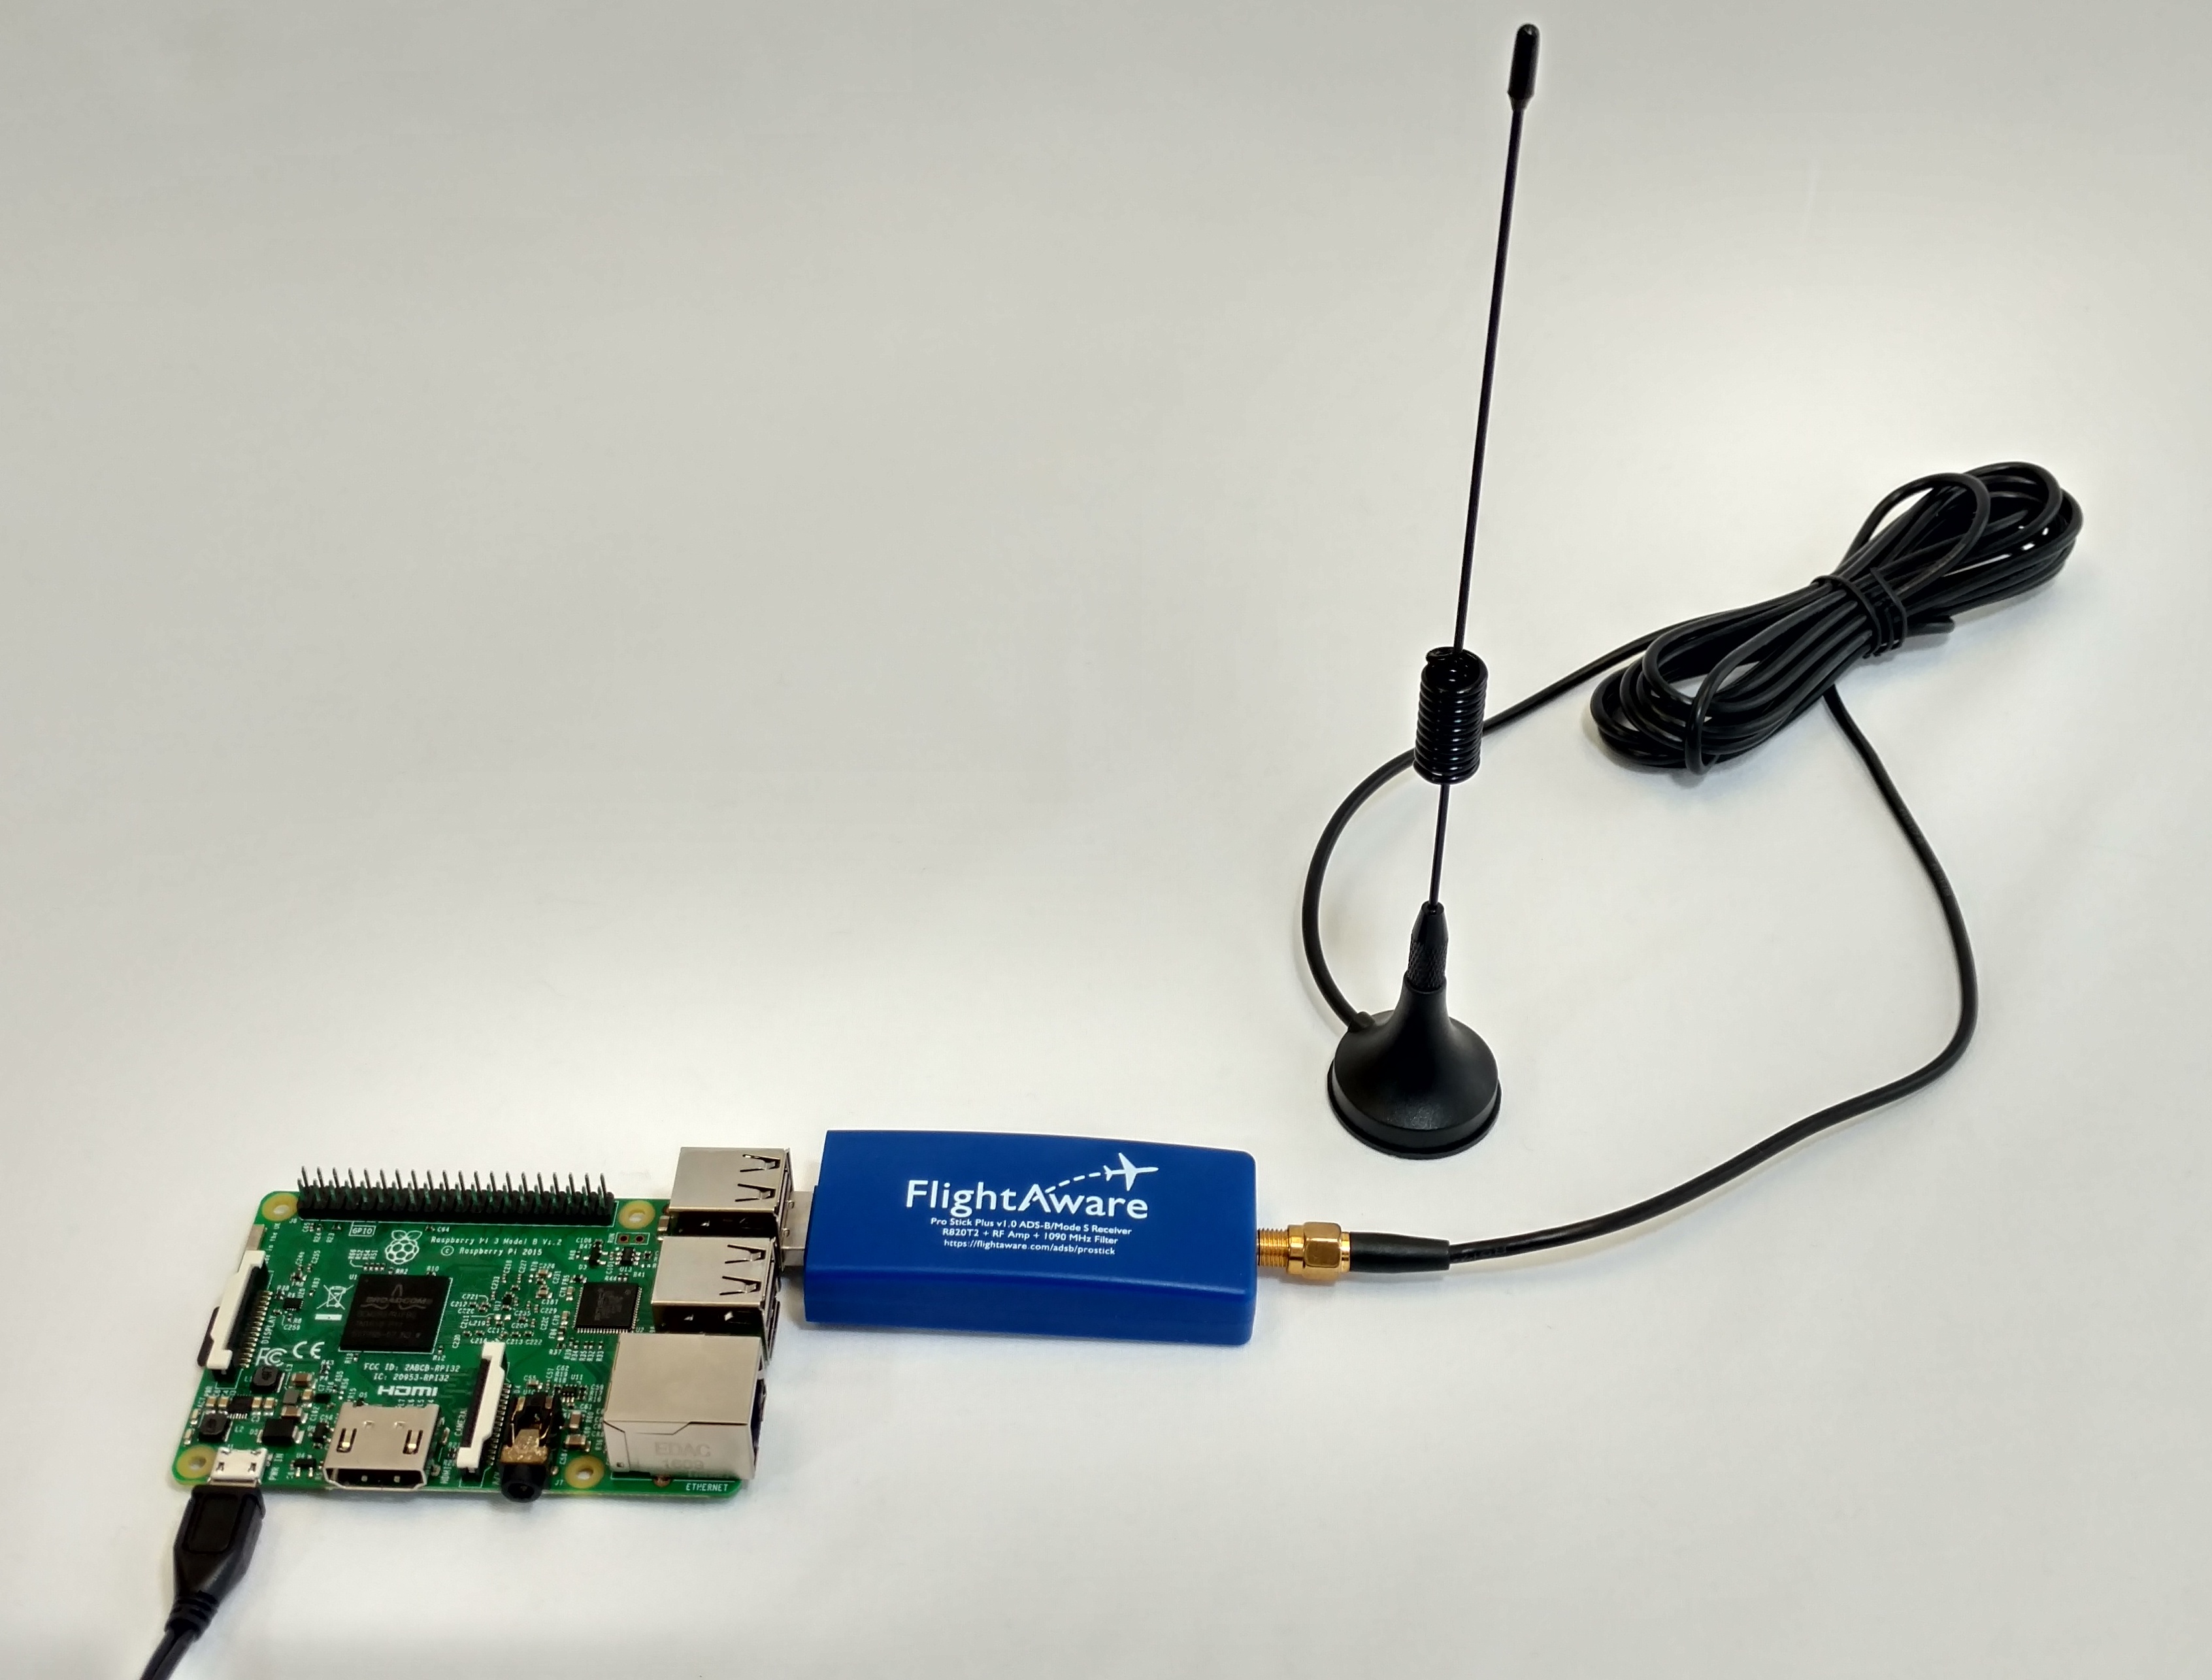 Raspberry Pi connected to power and an antenna